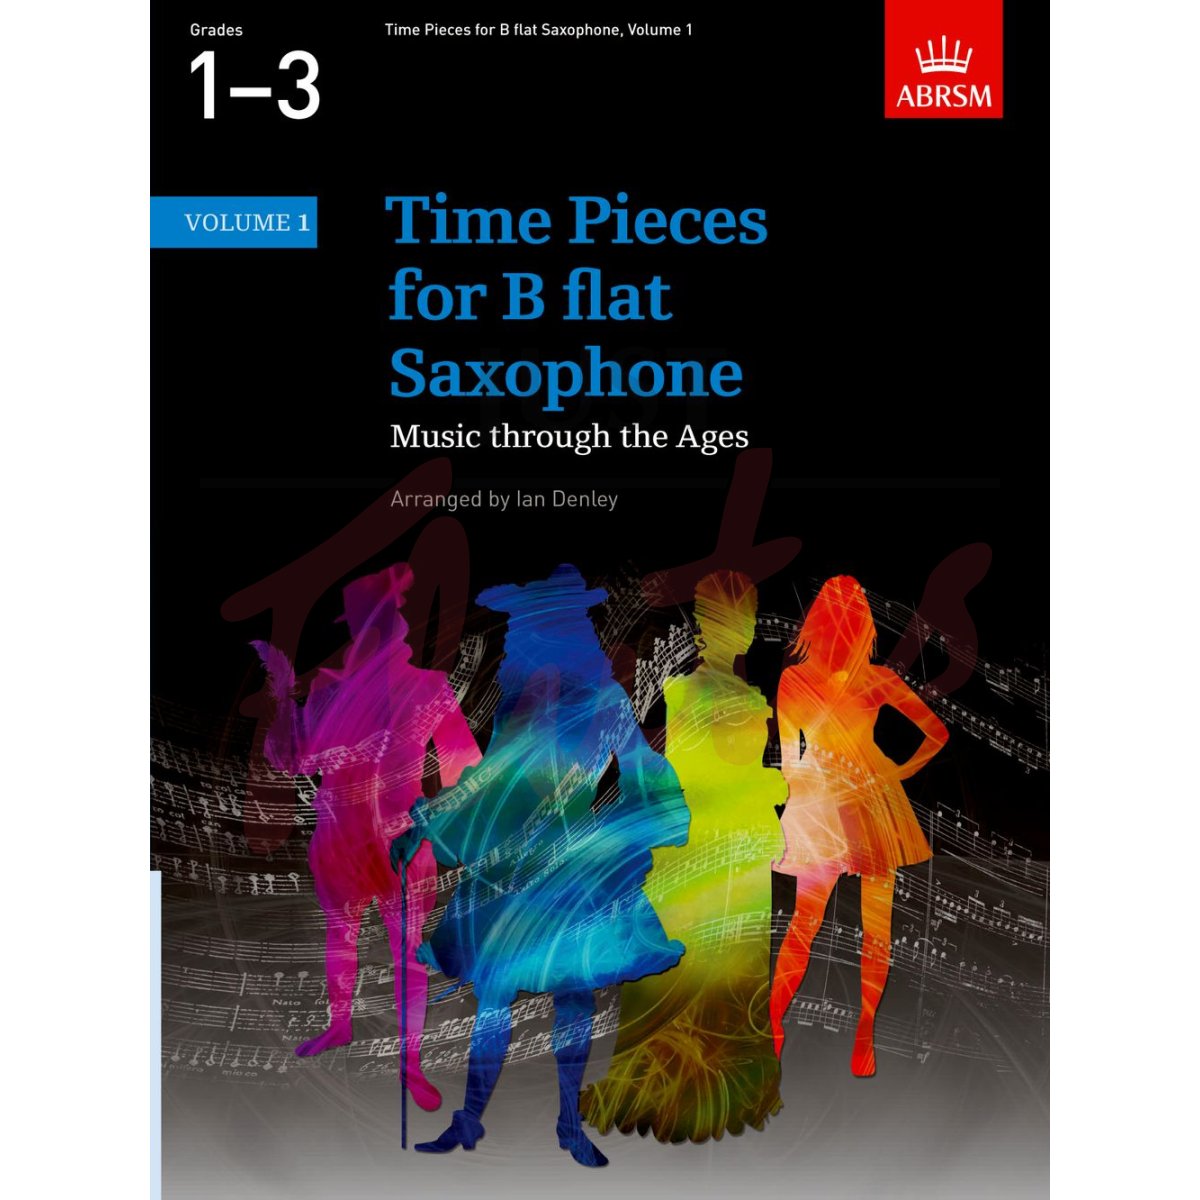 Time Pieces for B flat Saxophone